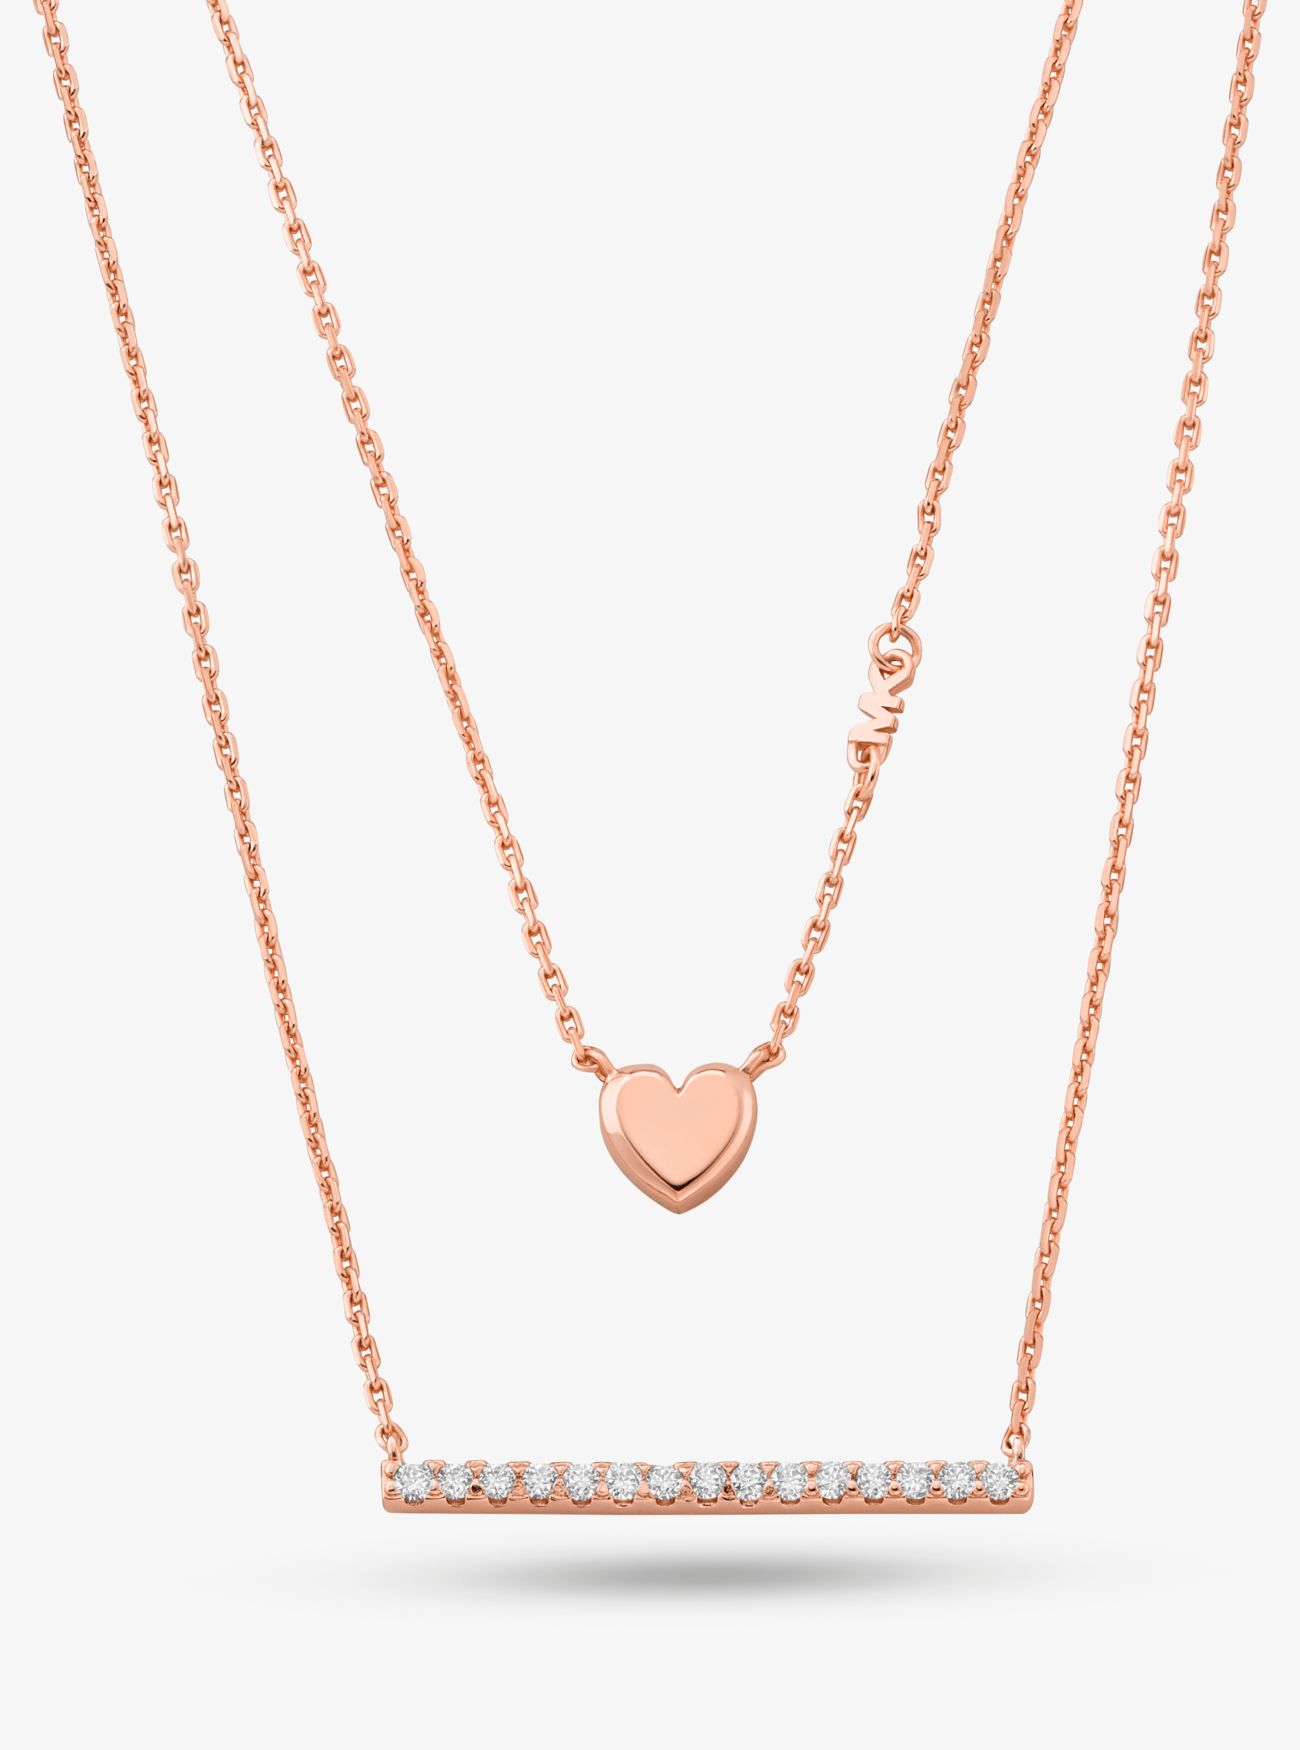 MK Precious Metal-Plated Sterling Silver Double Heart and Pavé Bar Necklace - Rose Gold - Michael Kors